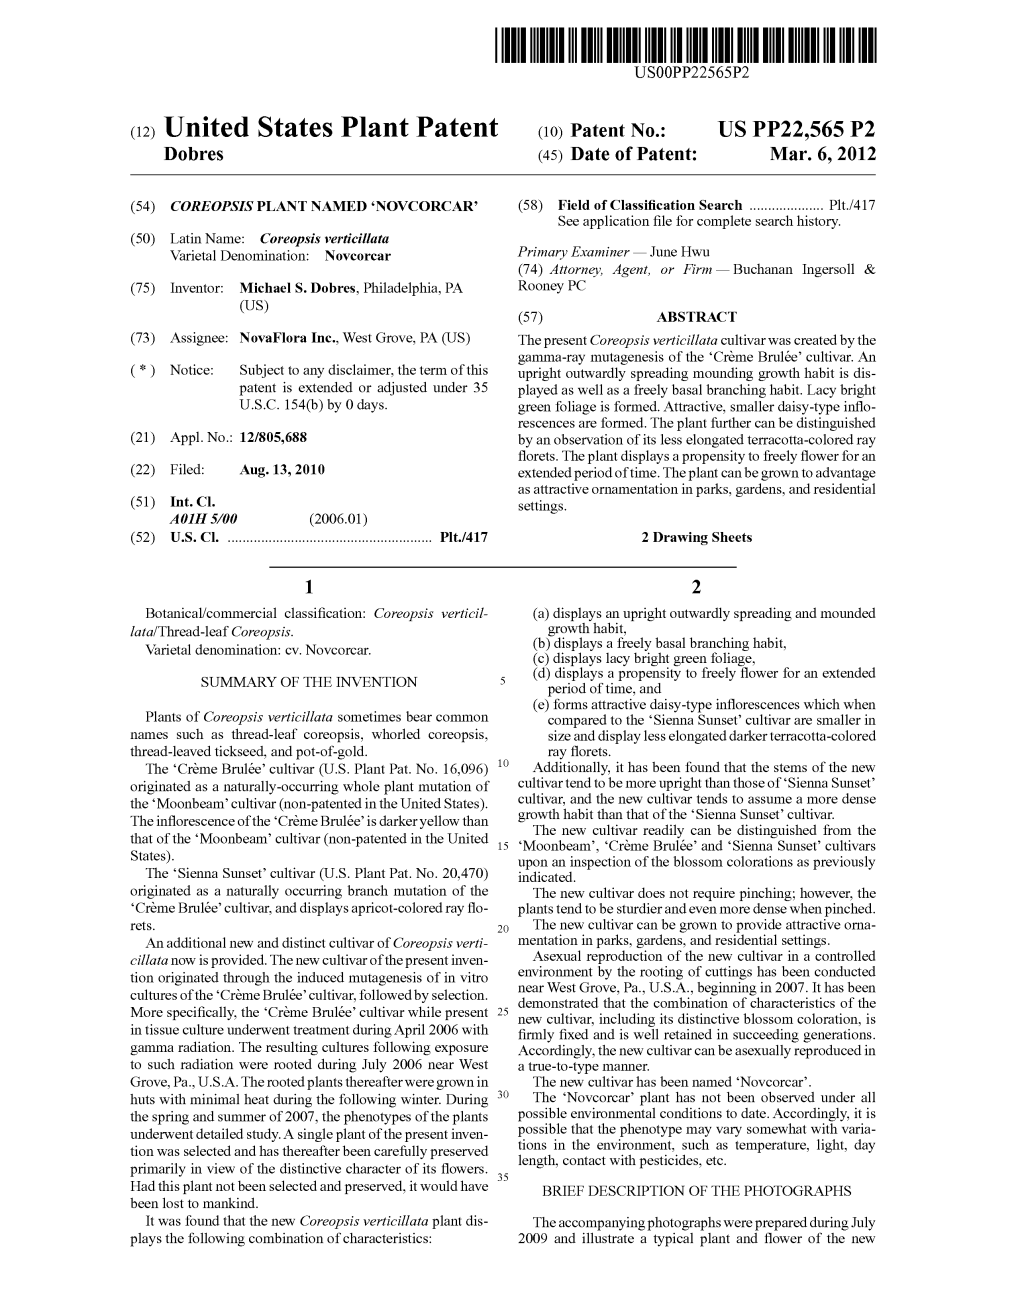 (12) United States Plant Patent (10) Patent N0.: US PP22,565 P2 Dobres (45) Date of Patent: Mar